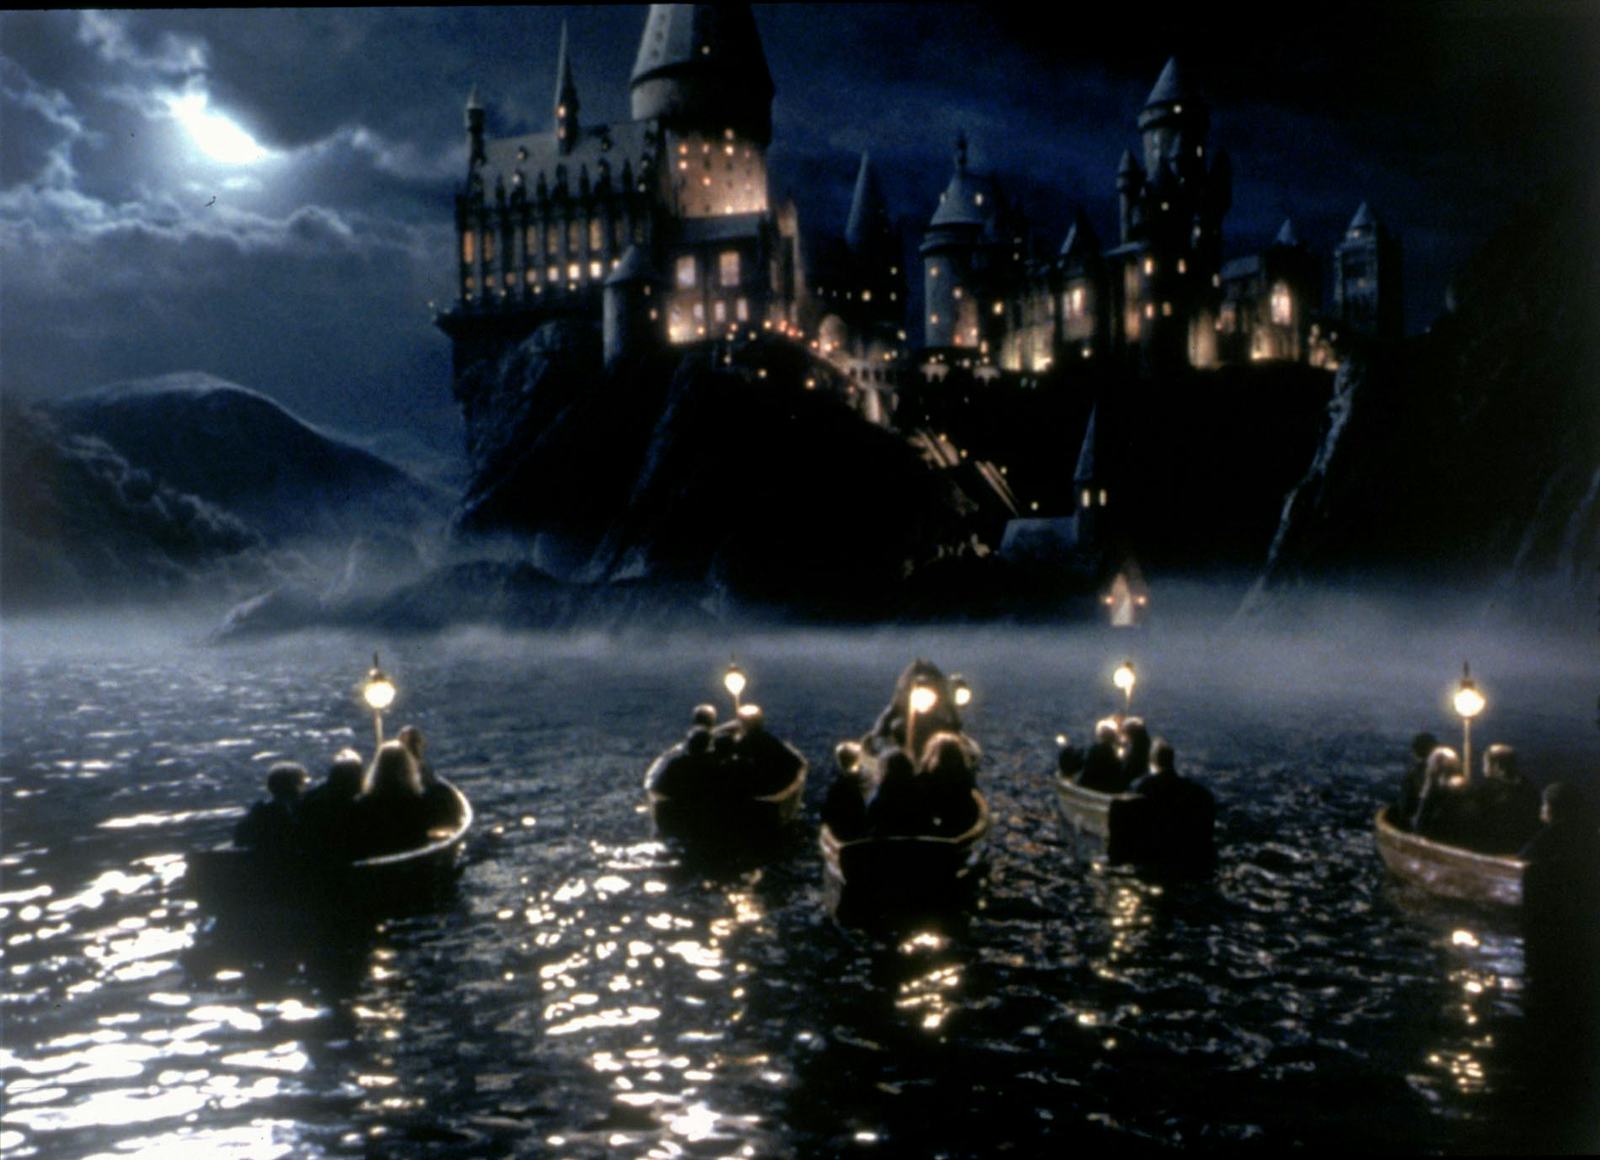 This Harry Potter Cruise Sounds Magical, But You're Going To Need To